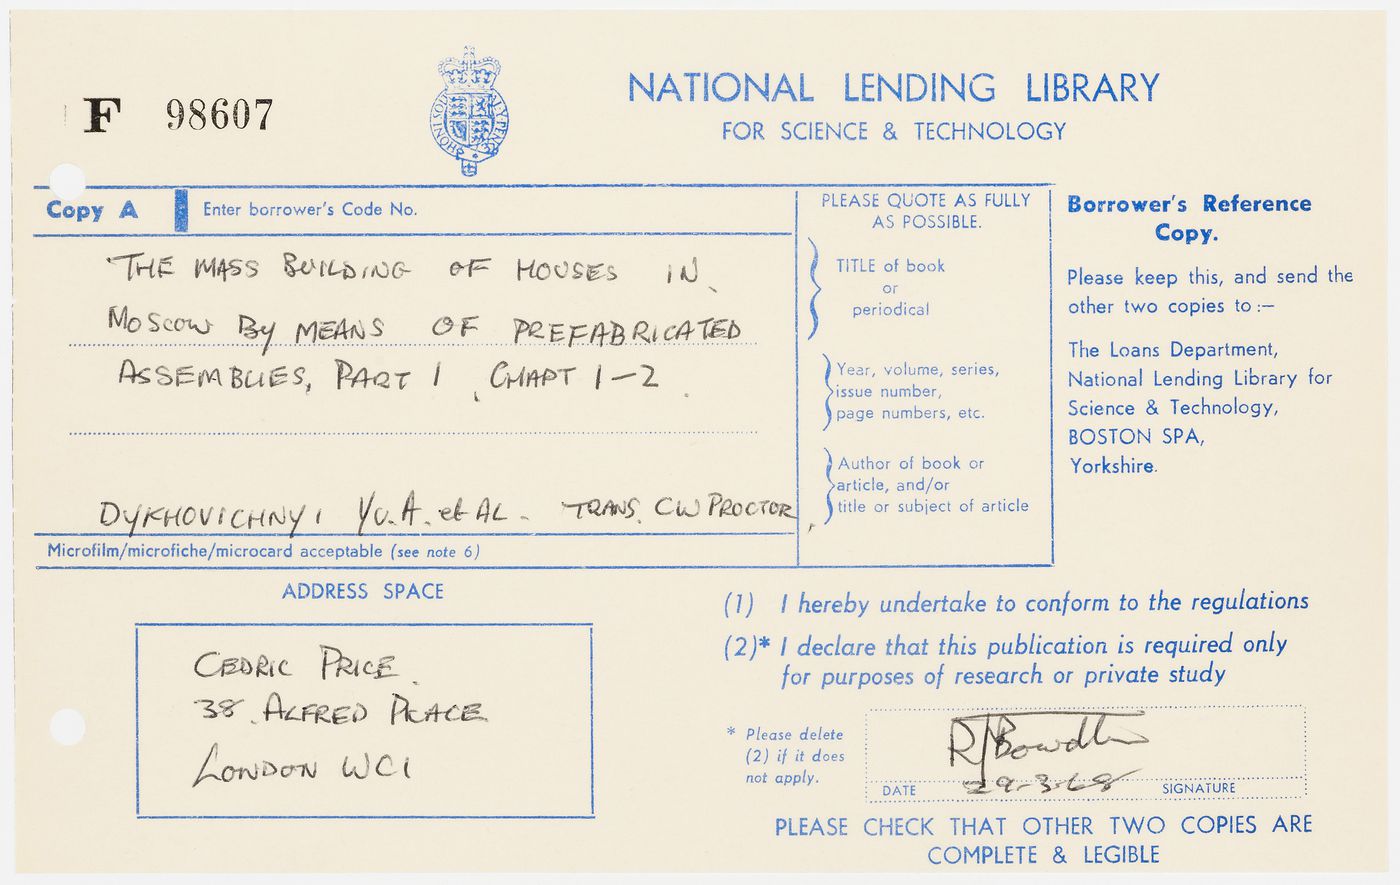 Loan slip from the National Lending Library for Science and Technology